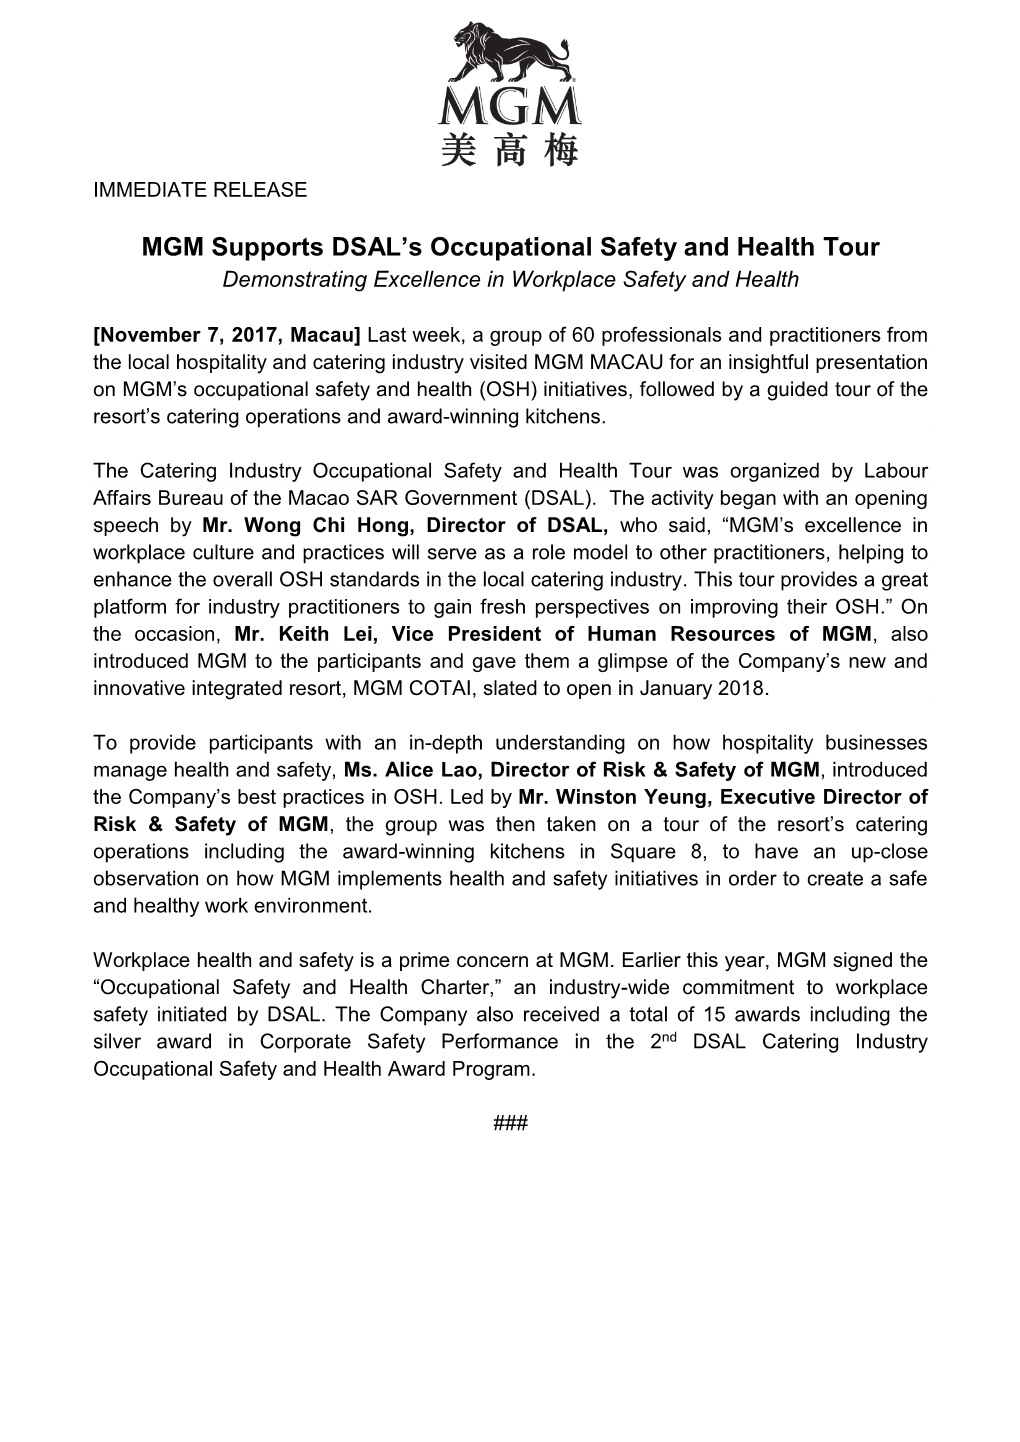 MGM Supports DSAL's Occupational Safety and Health Tour